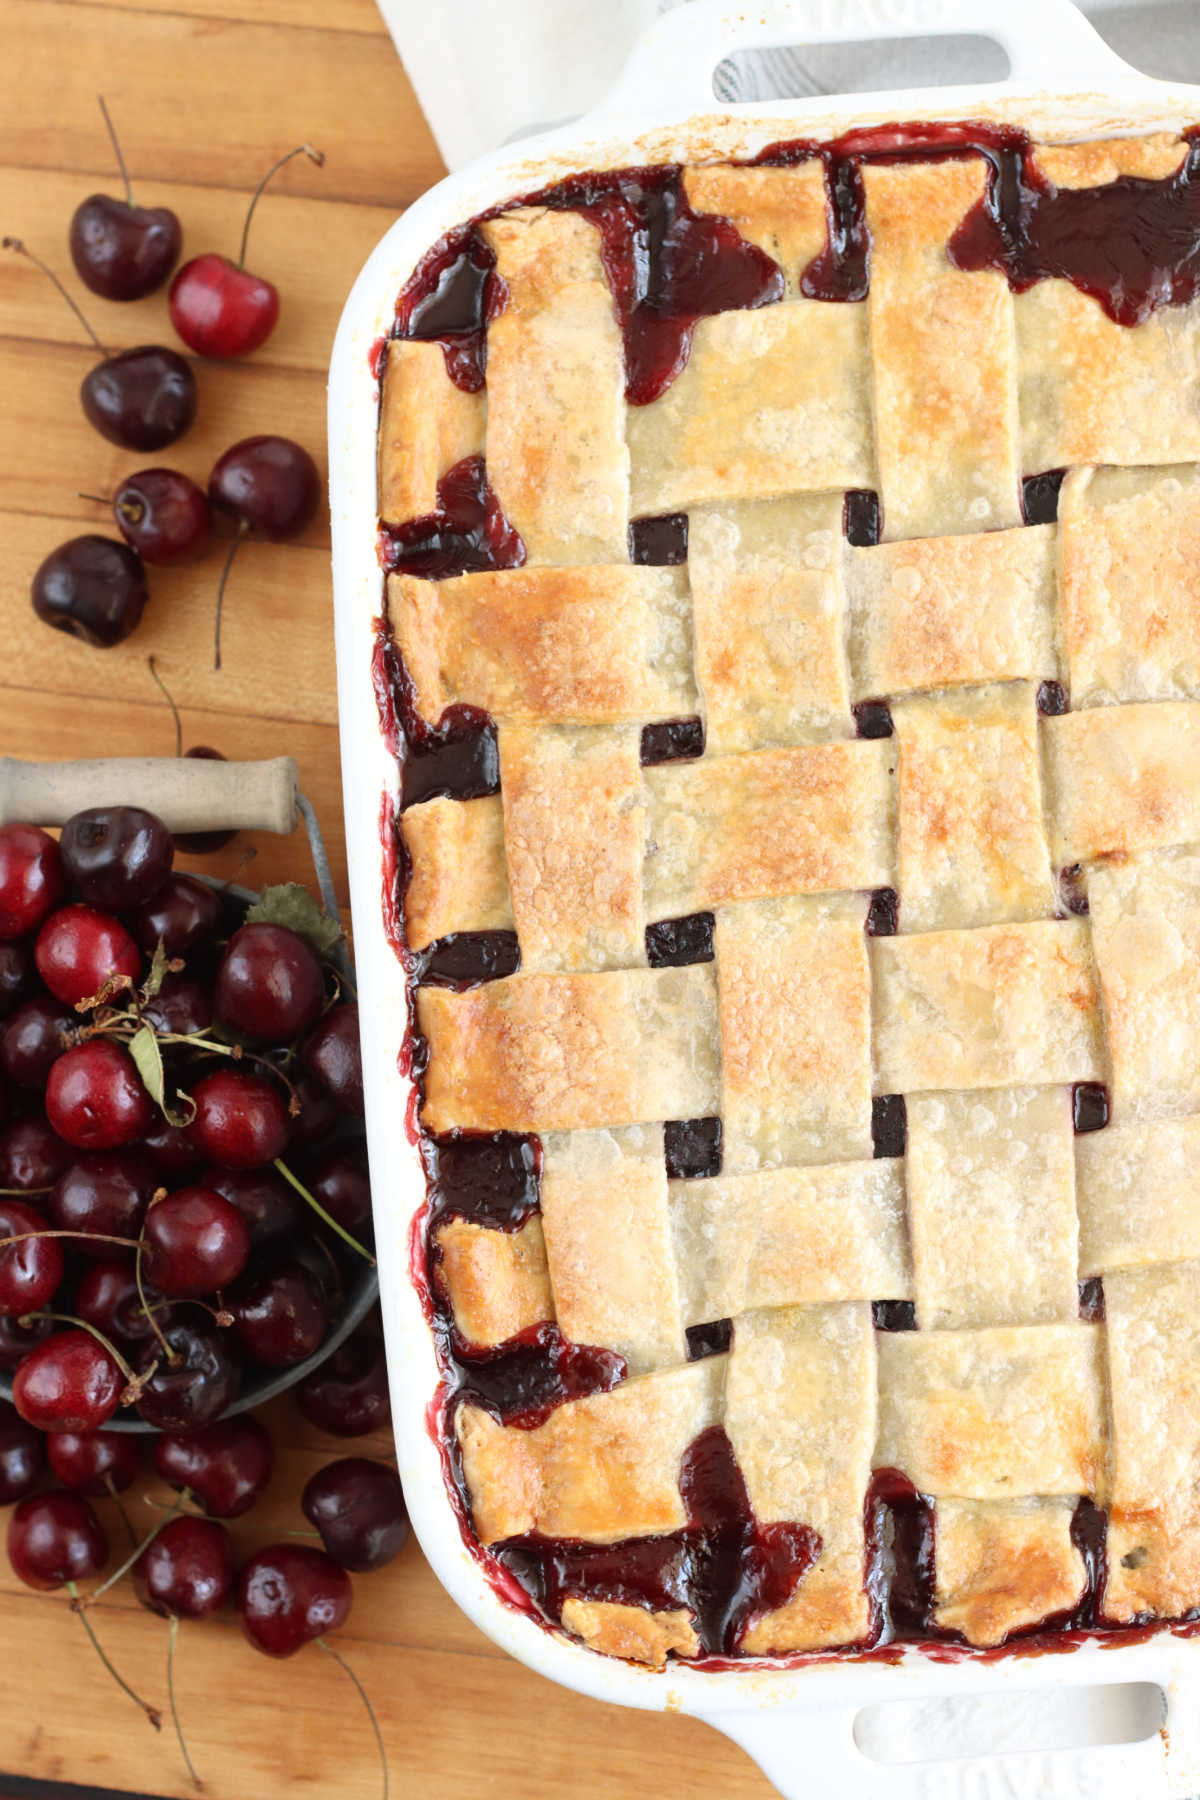 Cherry cobbler with lattice pie crust in white rectangle baking dish on wooden cutting board, fresh cherries to left.